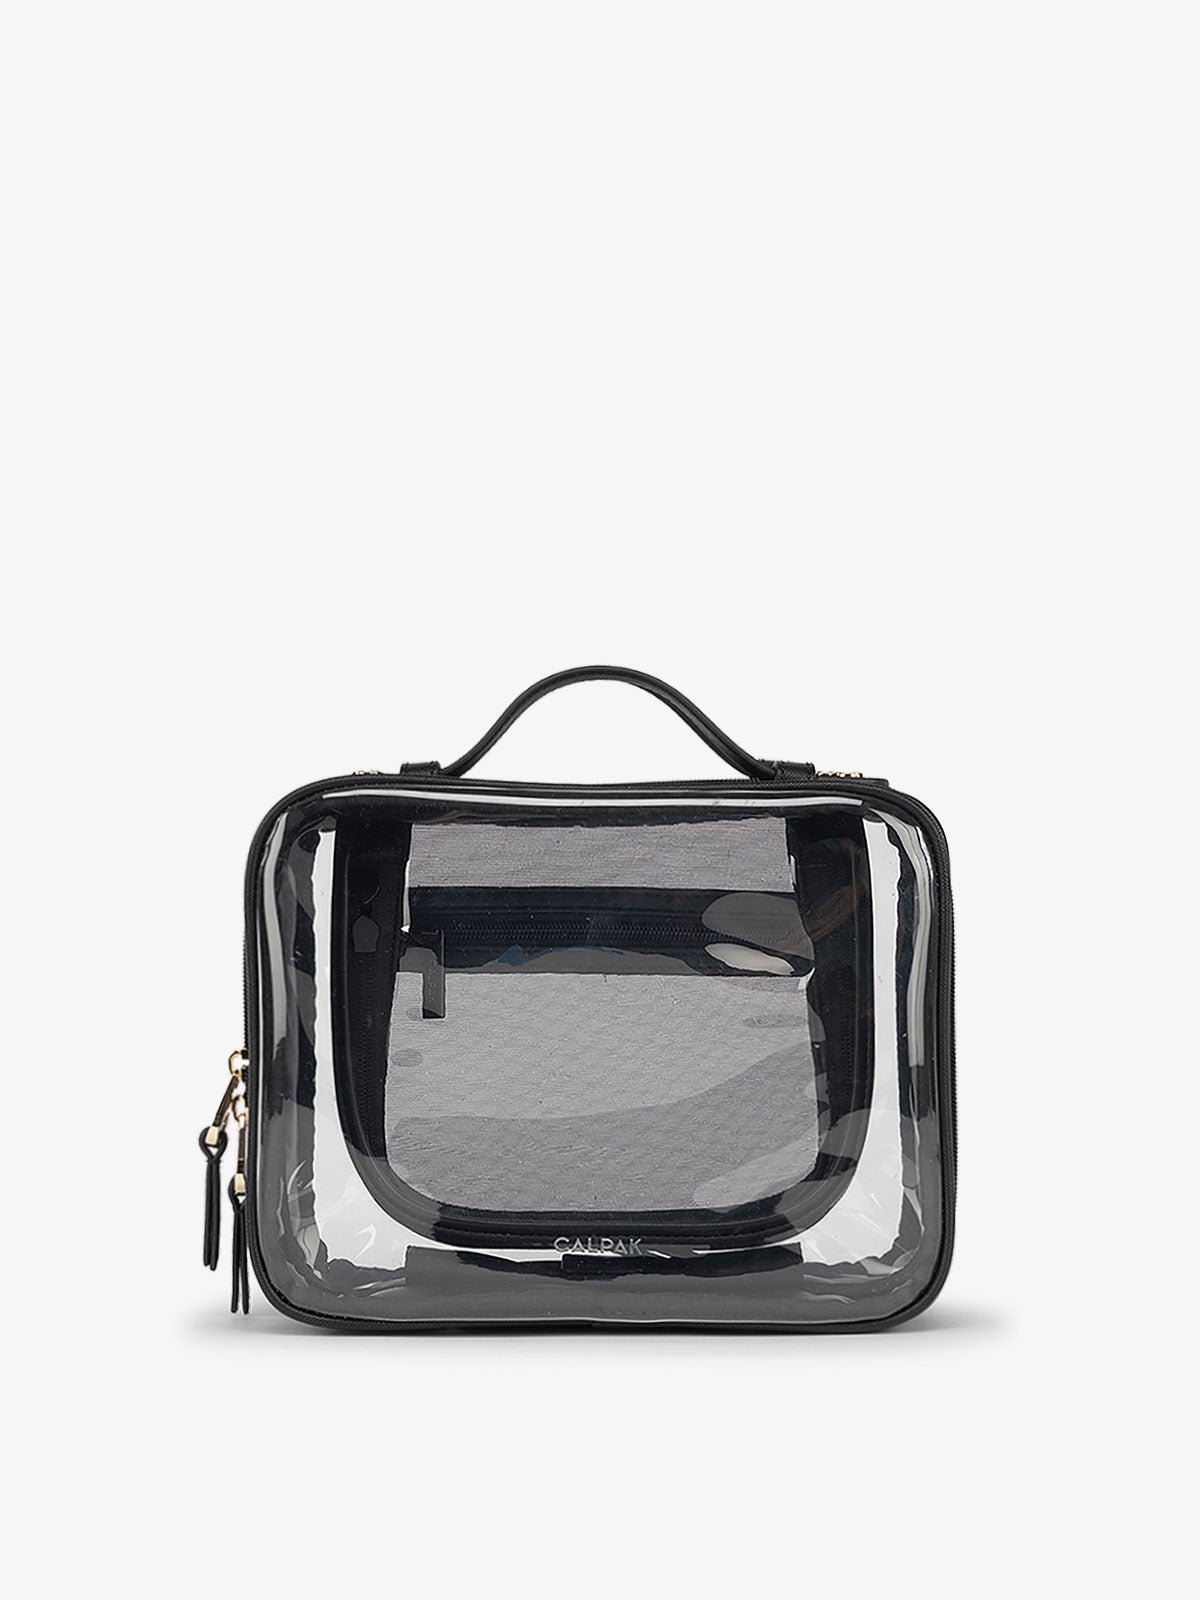 CALPAK Medium clear makeup bag with compartments in black